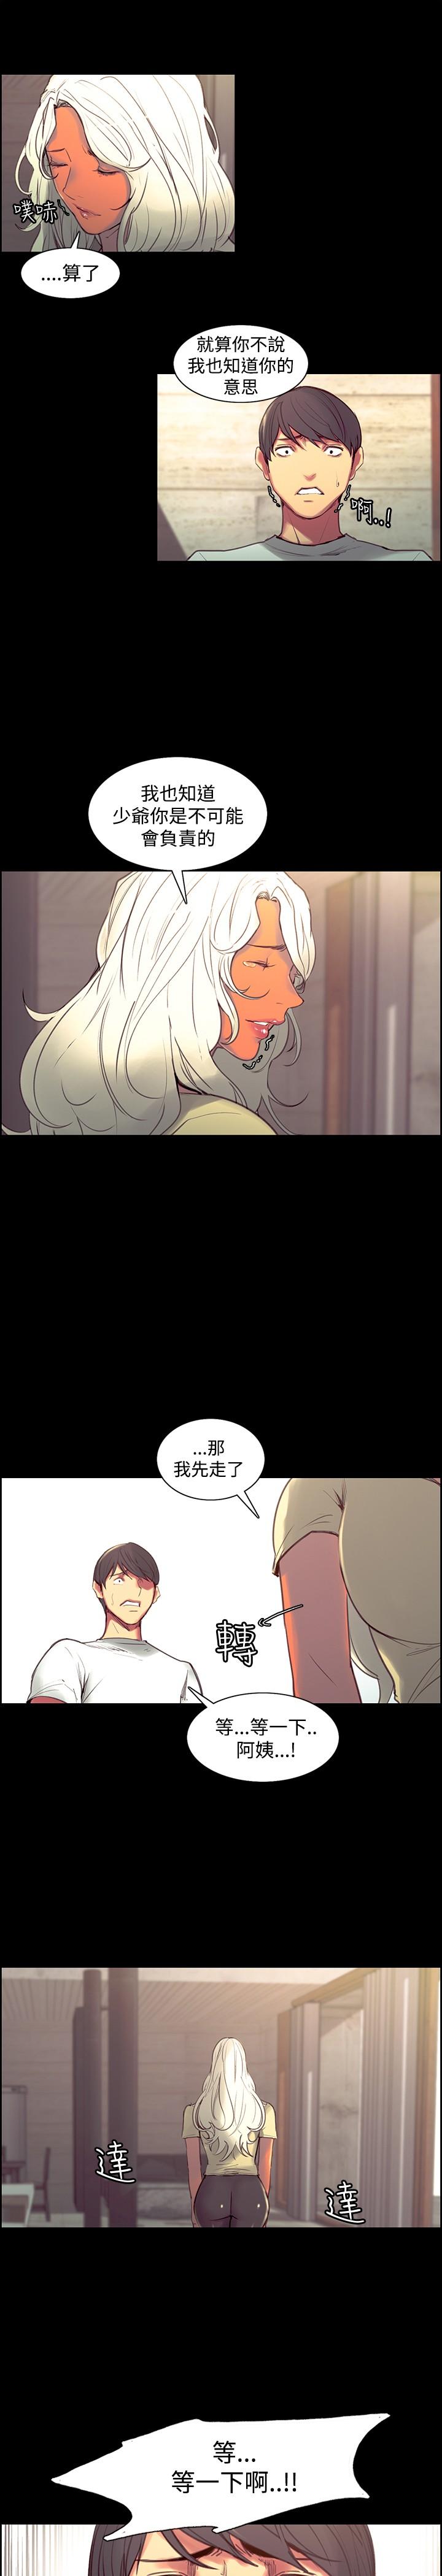 [Serious] Domesticate the Housekeeper 调教家政妇 Ch.29~44END [Chinese]中文 161